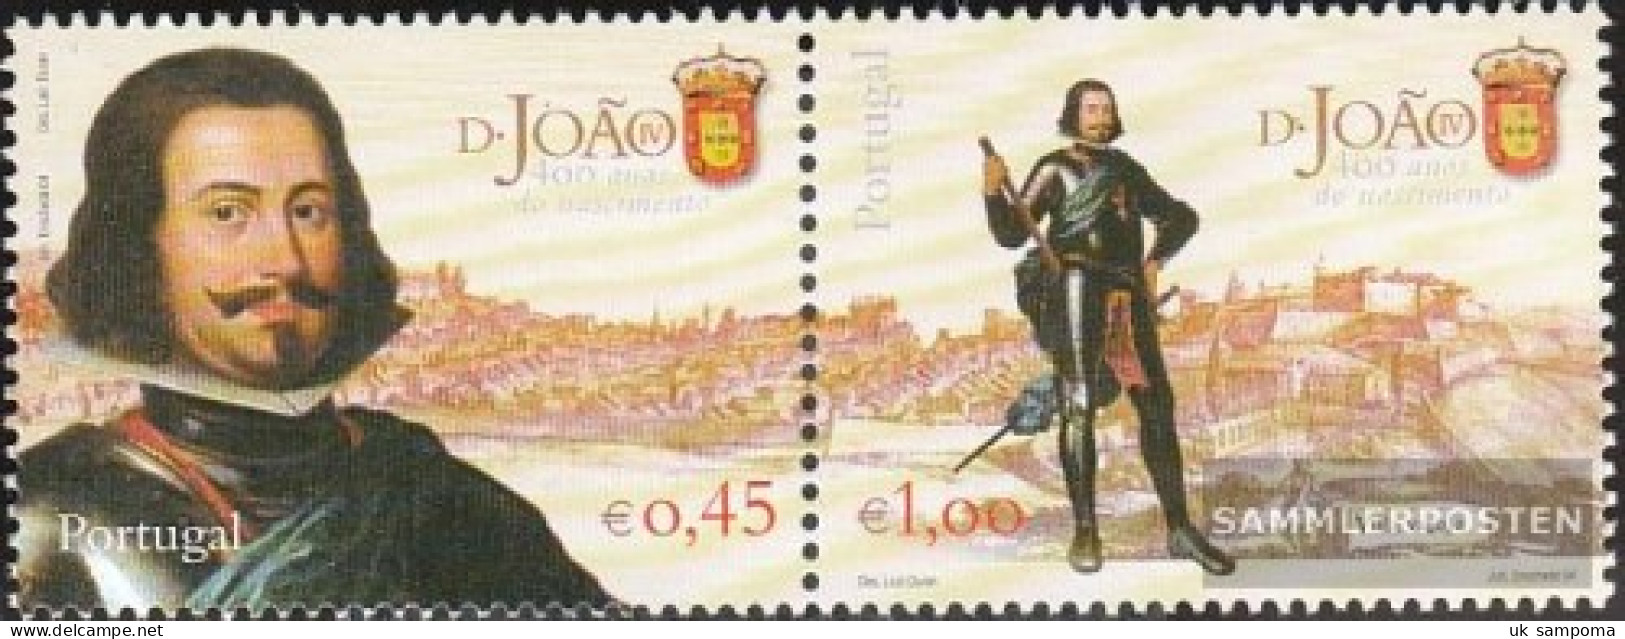 Portugal 2760-2761 Couple (complete Issue) Unmounted Mint / Never Hinged 2004 King Johann IV. - Nuovi